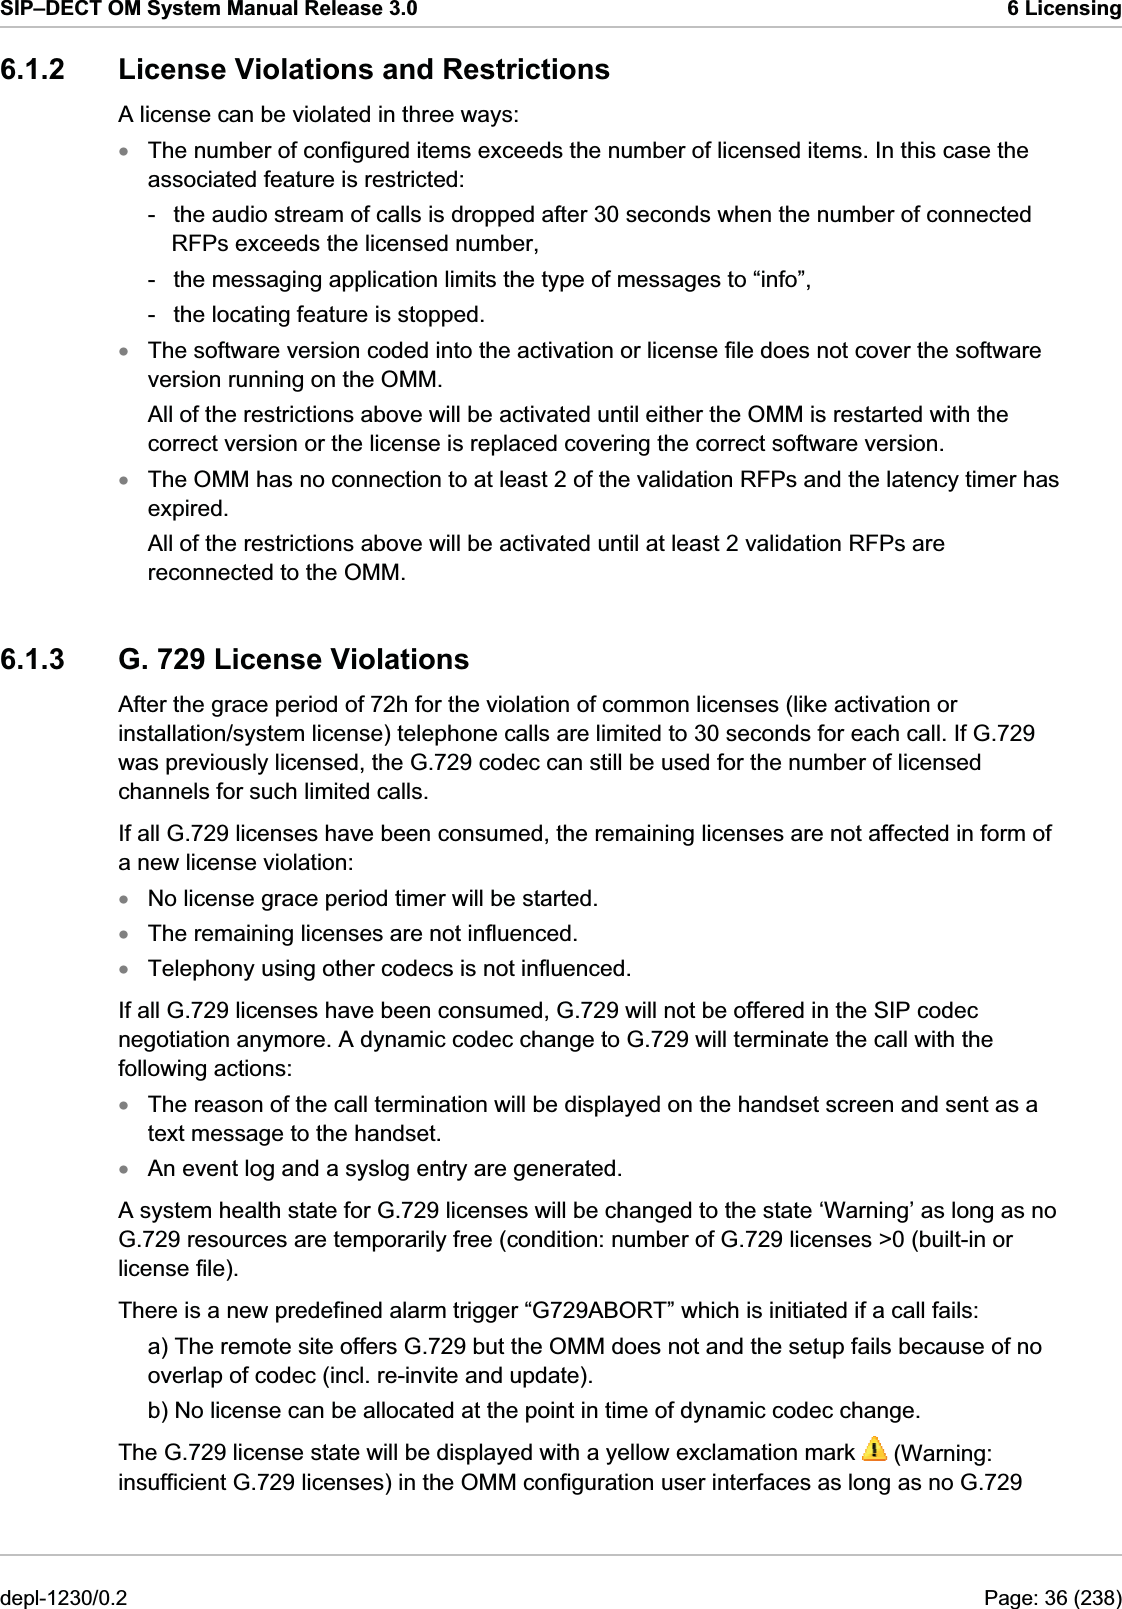 SIP–DECT OM System Manual Release 3.0  6 Licensing 6.1.2  License Violations and Restrictions A license can be violated in three ways: The number of configured items exceeds the number of licensed items. In this case the associated feature is restricted: xxxxxxxx-  the audio stream of calls is dropped after 30 seconds when the number of connected RFPs exceeds the licensed number, -  the messaging application limits the type of messages to “info”, -  the locating feature is stopped. The software version coded into the activation or license file does not cover the software version running on the OMM. All of the restrictions above will be activated until either the OMM is restarted with the correct version or the license is replaced covering the correct software version. The OMM has no connection to at least 2 of the validation RFPs and the latency timer has expired. All of the restrictions above will be activated until at least 2 validation RFPs are reconnected to the OMM.  6.1.3  G. 729 License Violations After the grace period of 72h for the violation of common licenses (like activation or installation/system license) telephone calls are limited to 30 seconds for each call. If G.729 was previously licensed, the G.729 codec can still be used for the number of licensed channels for such limited calls. If all G.729 licenses have been consumed, the remaining licenses are not affected in form of a new license violation: No license grace period timer will be started. The remaining licenses are not influenced. Telephony using other codecs is not influenced. If all G.729 licenses have been consumed, G.729 will not be offered in the SIP codec negotiation anymore. A dynamic codec change to G.729 will terminate the call with the following actions: The reason of the call termination will be displayed on the handset screen and sent as a text message to the handset. An event log and a syslog entry are generated.  A system health state for G.729 licenses will be changed to the state ‘Warning’ as long as no G.729 resources are temporarily free (condition: number of G.729 licenses &gt;0 (built-in or license file). There is a new predefined alarm trigger “G729ABORT” which is initiated if a call fails:  a) The remote site offers G.729 but the OMM does not and the setup fails because of no overlap of codec (incl. re-invite and update).  b) No license can be allocated at the point in time of dynamic codec change.  The G.729 license state will be displayed with a yellow exclamation mark   (Warning: insufficient G.729 licenses) in the OMM configuration user interfaces as long as no G.729 depl-1230/0.2  Page: 36 (238) 